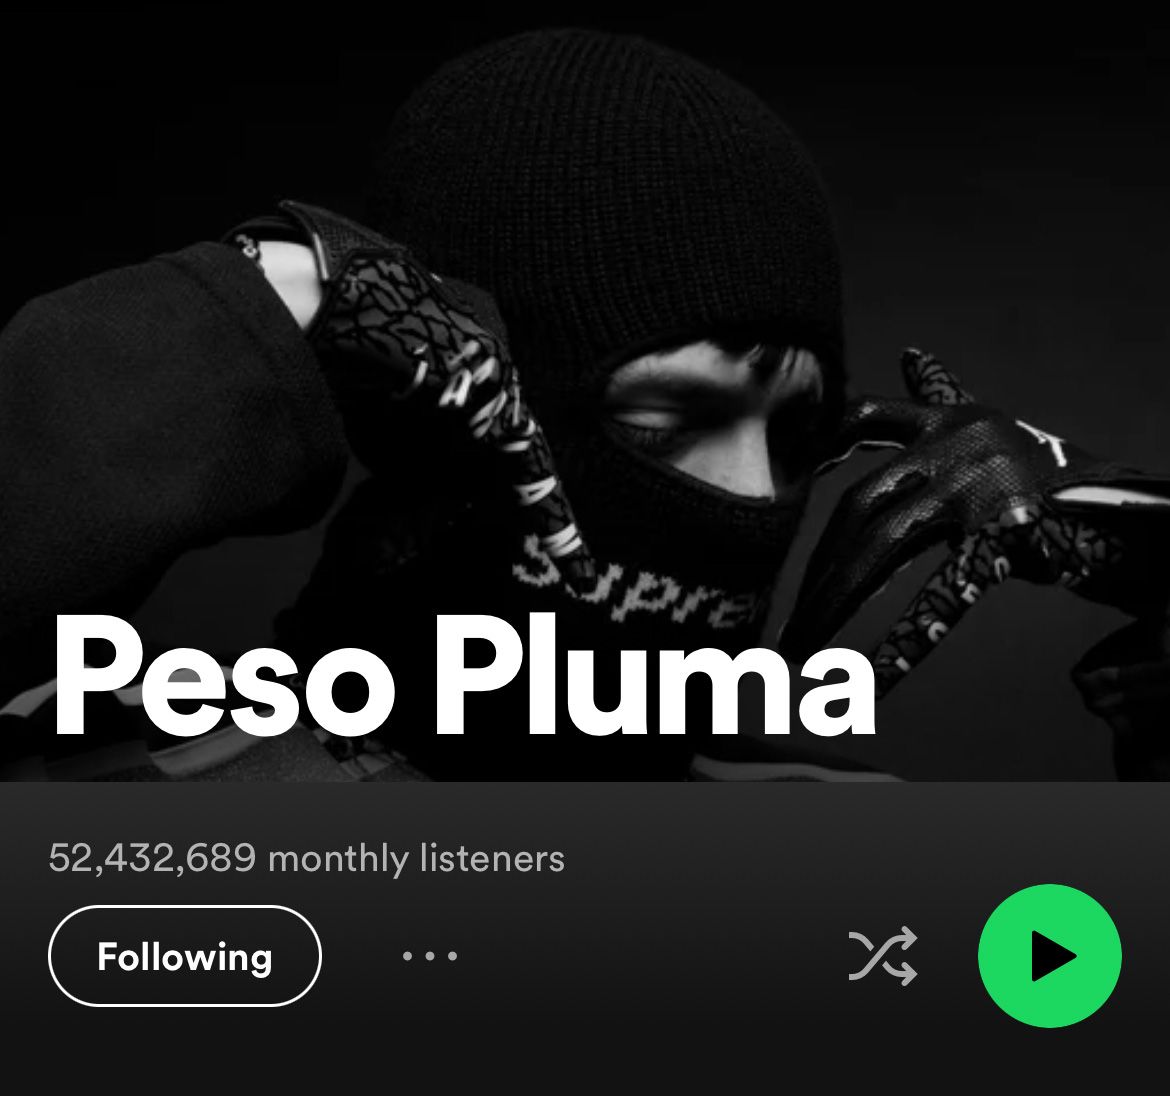 How did Peso Pluma grow to 50 million monthly listeners?